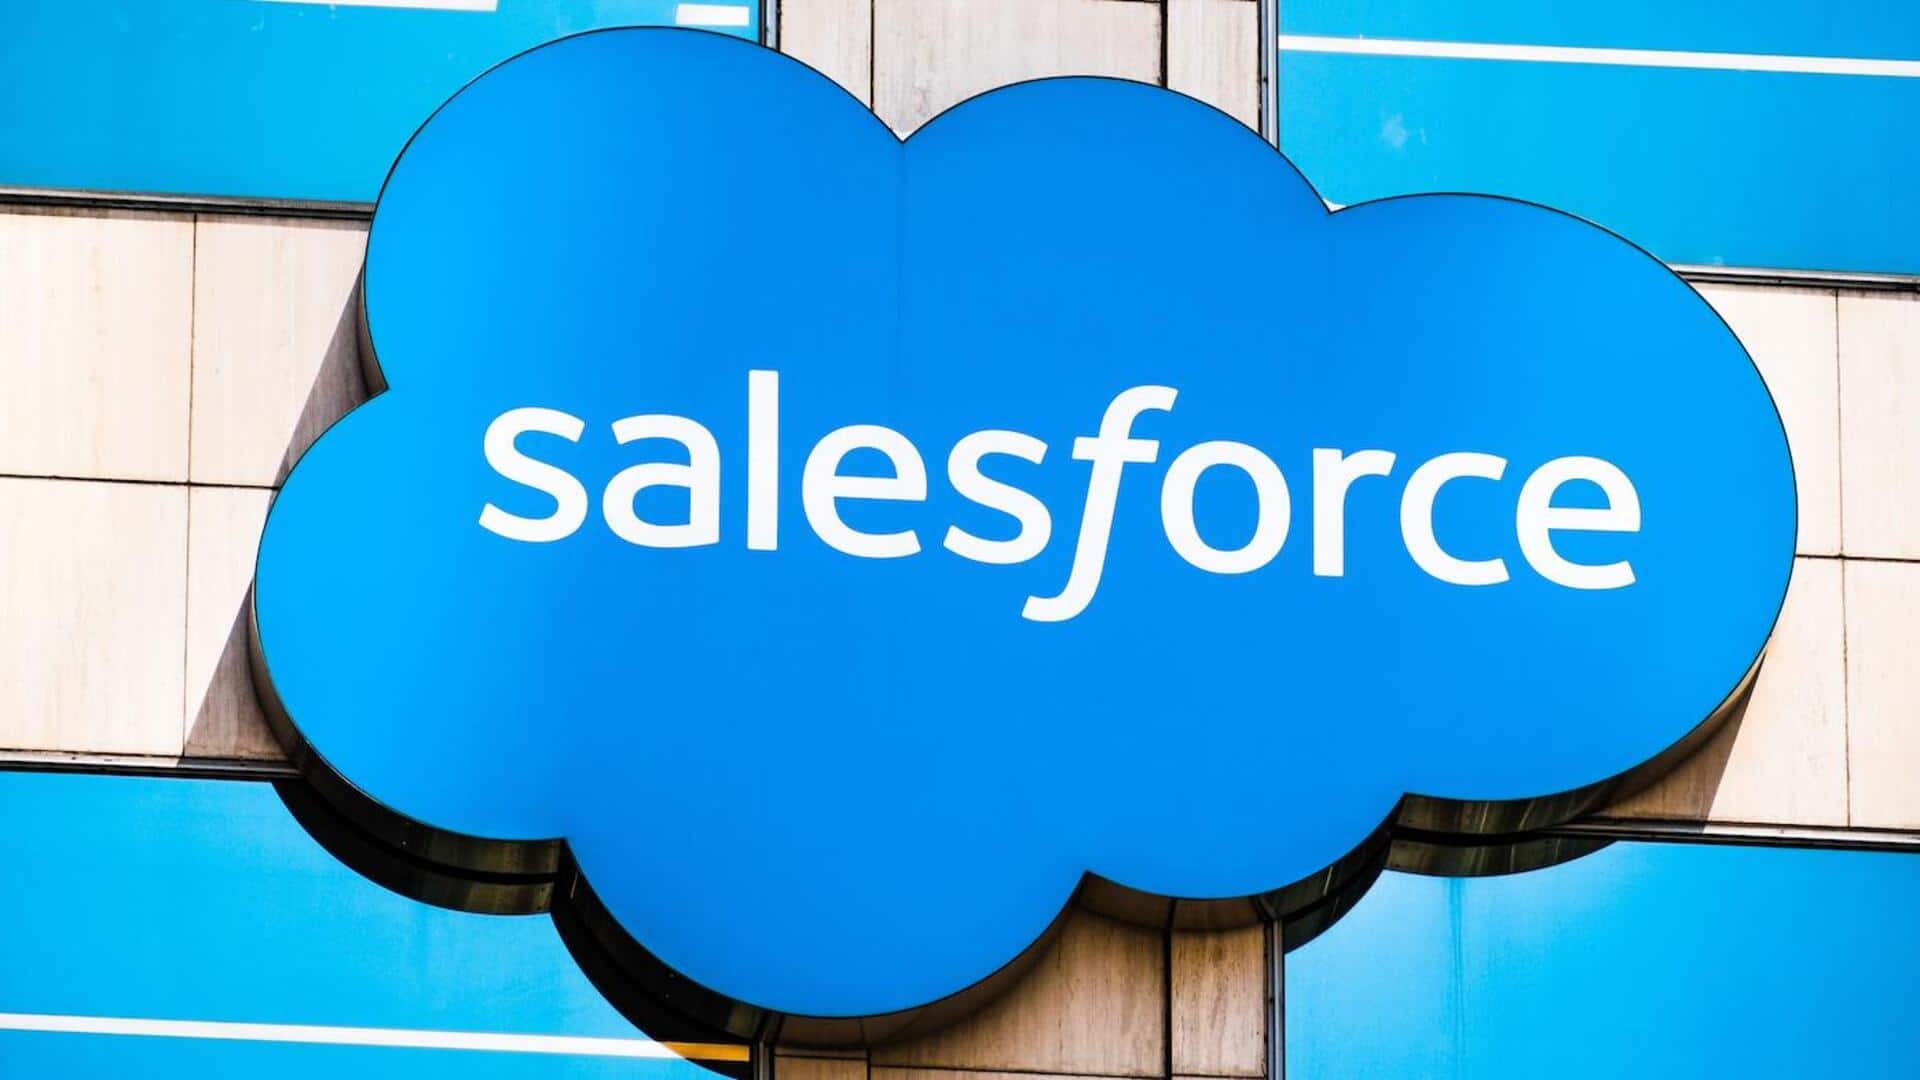 Salesforce cuts 700 jobs as downsizing continues in tech industry 